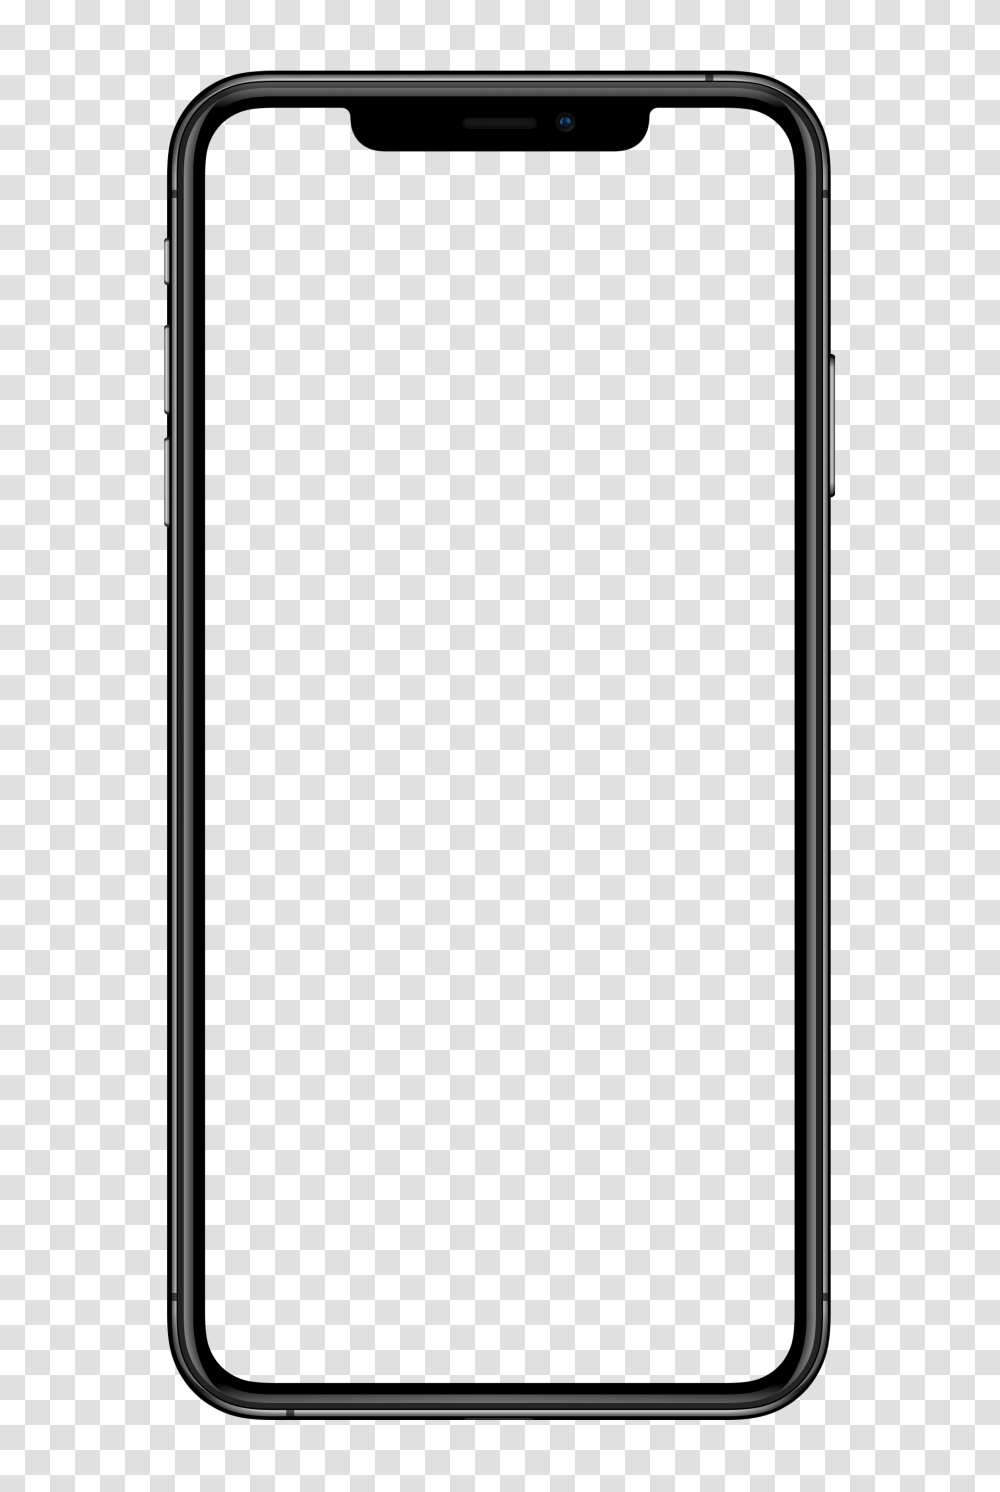 Apple Iphone Xs Mobile, Electronics, Mobile Phone, Cell Phone, Texting Transparent Png